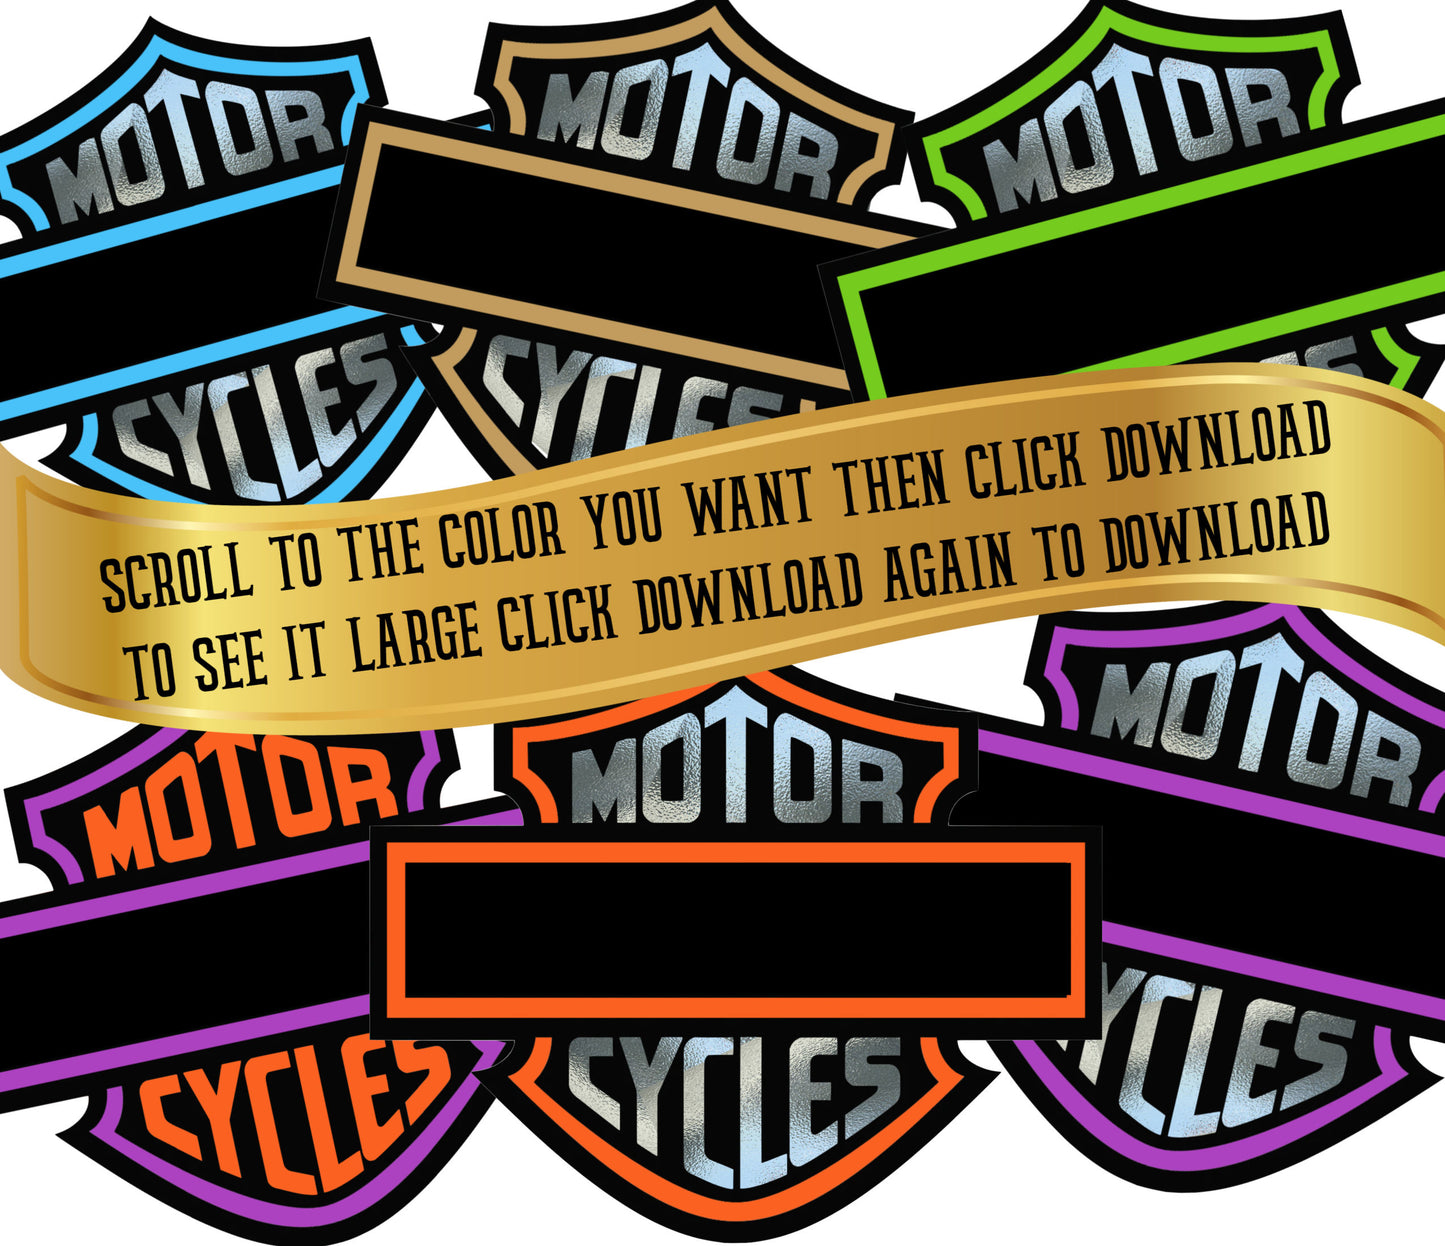 Personalize your own Motorcycle sign, boys party, badge - Tag - or Ornament - CLIP ART